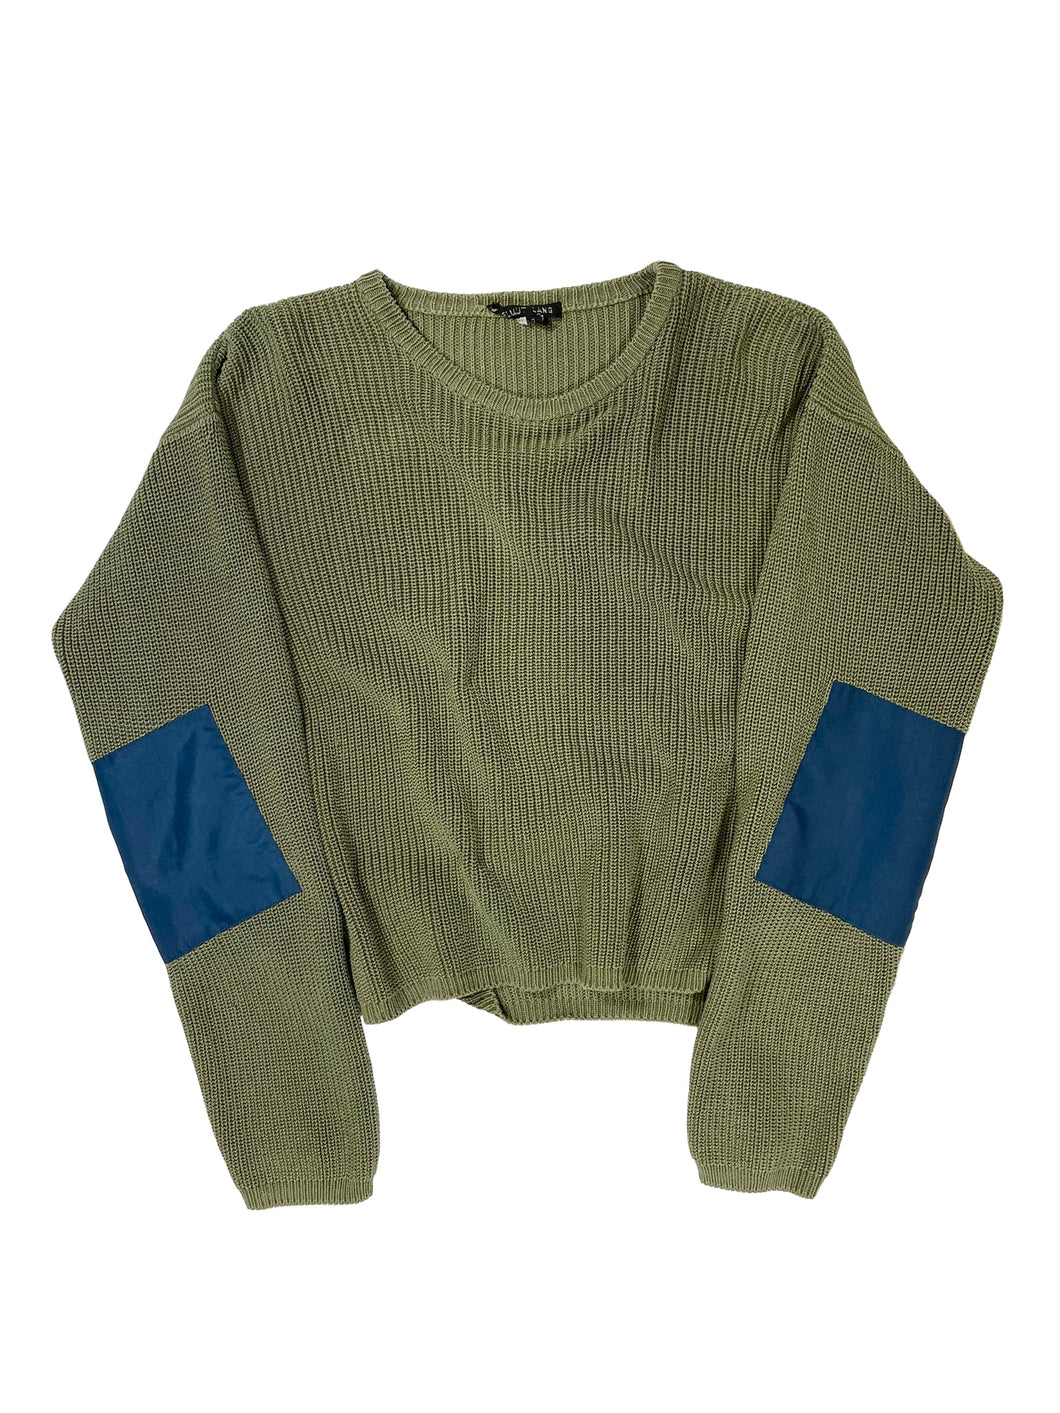 1990s Helmut Lang elbow patch cropped oversized sweater